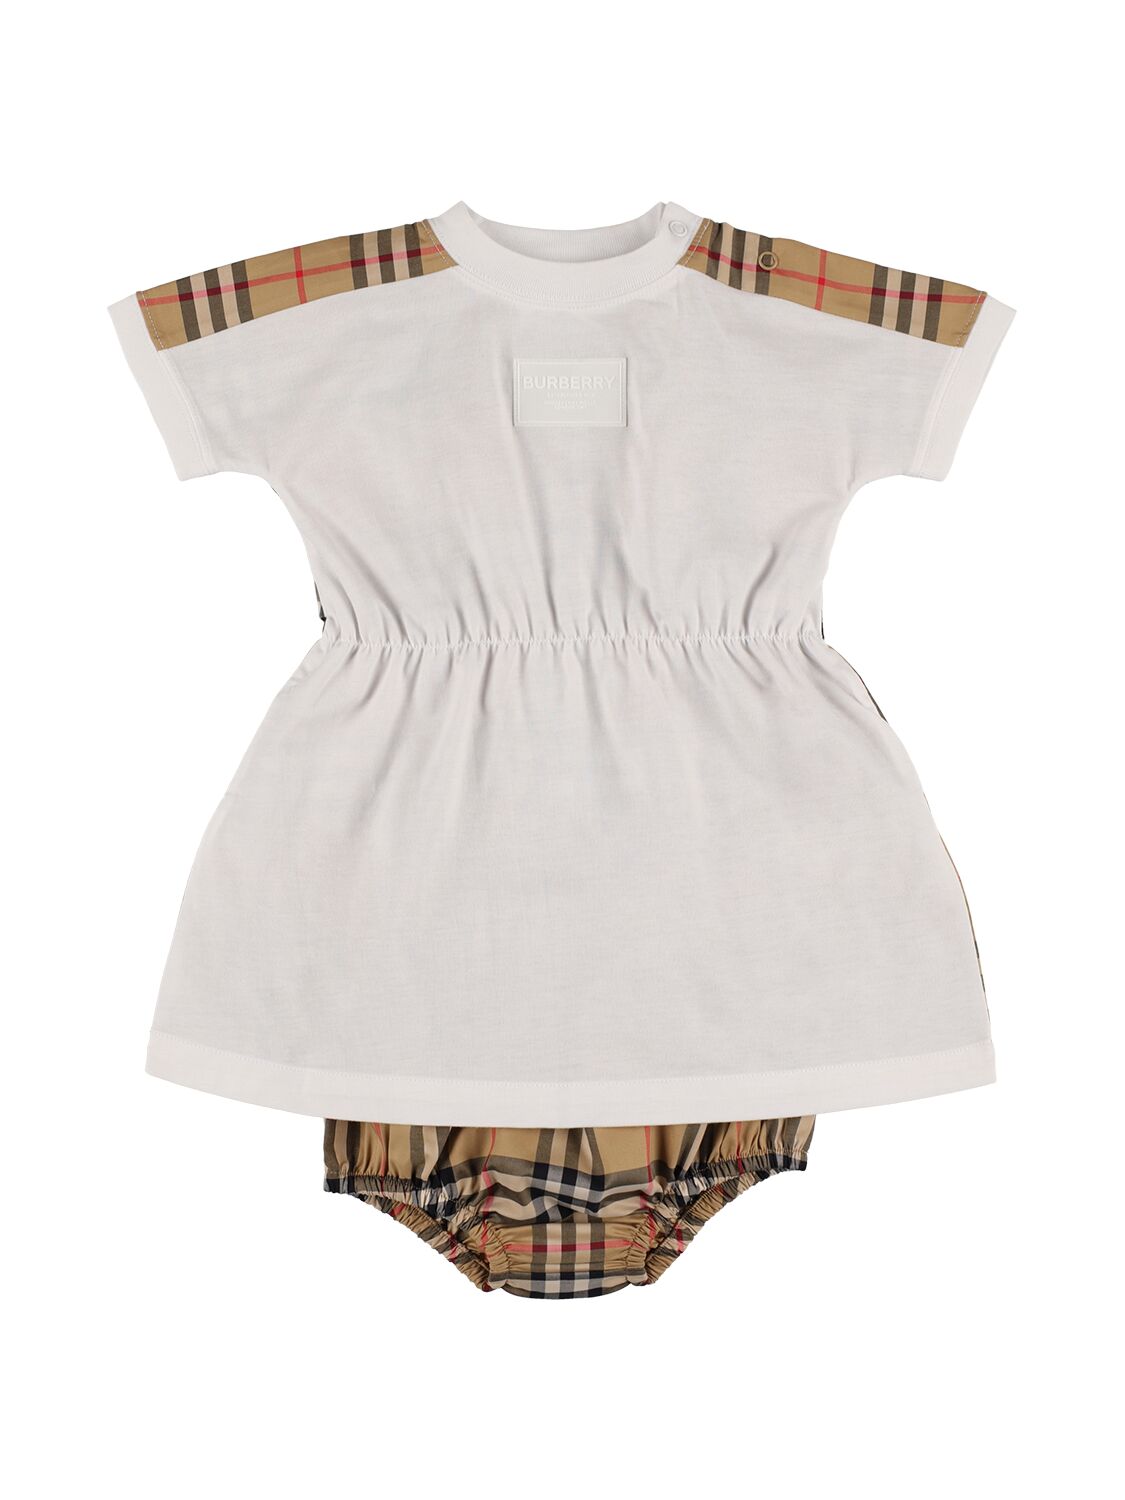 Burberry Babies' Check Print Cotton Dress W/ Diaper Cover In White,beige